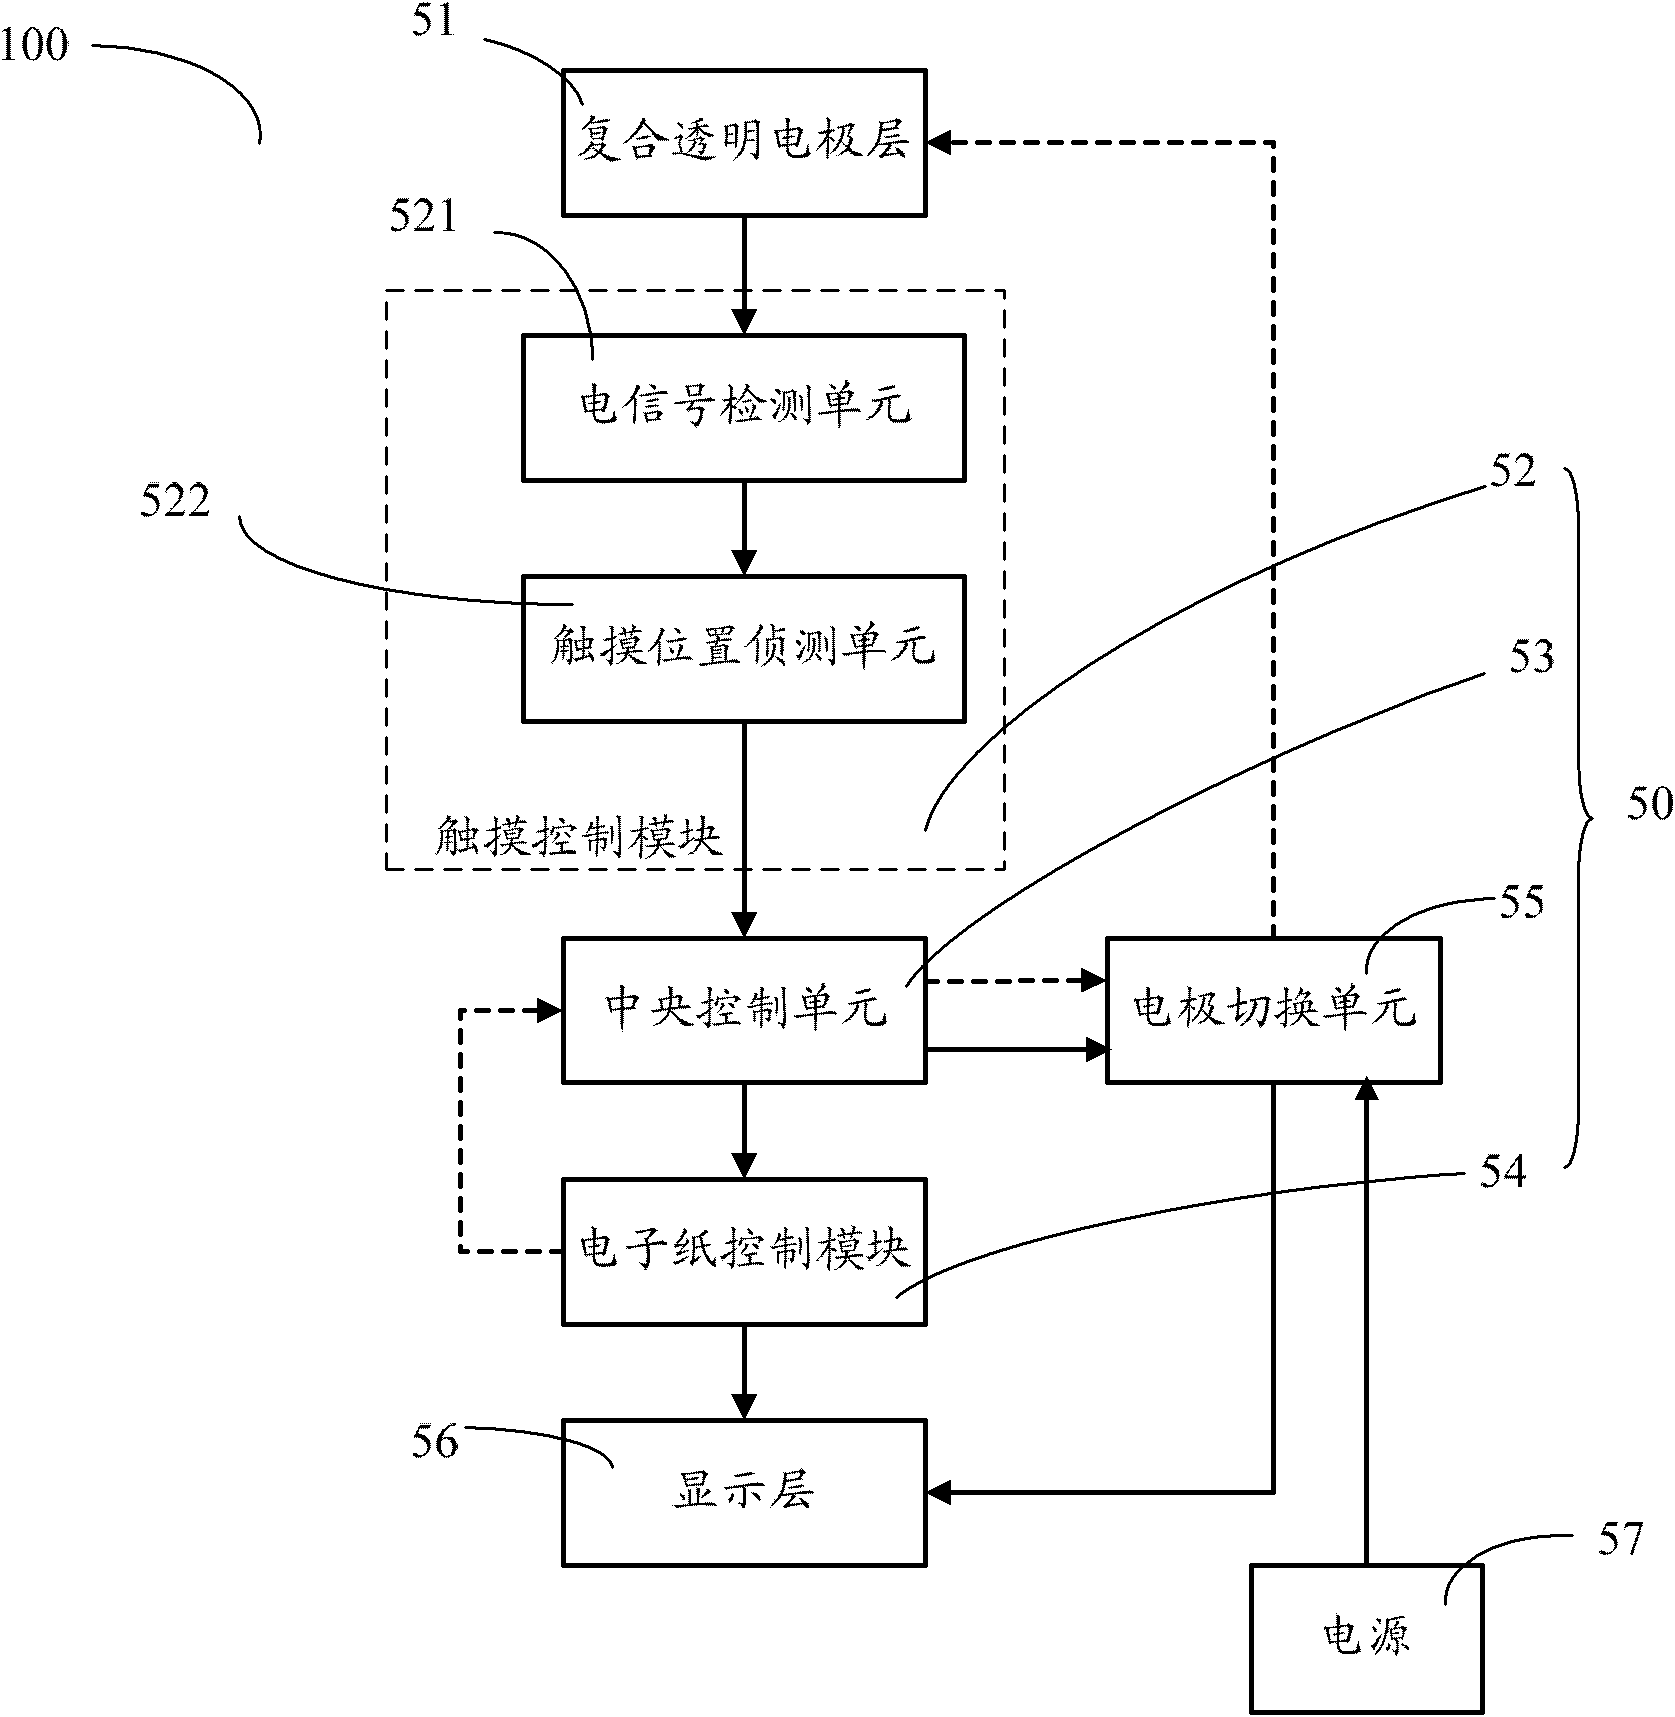 Electronic paper display device with touch function